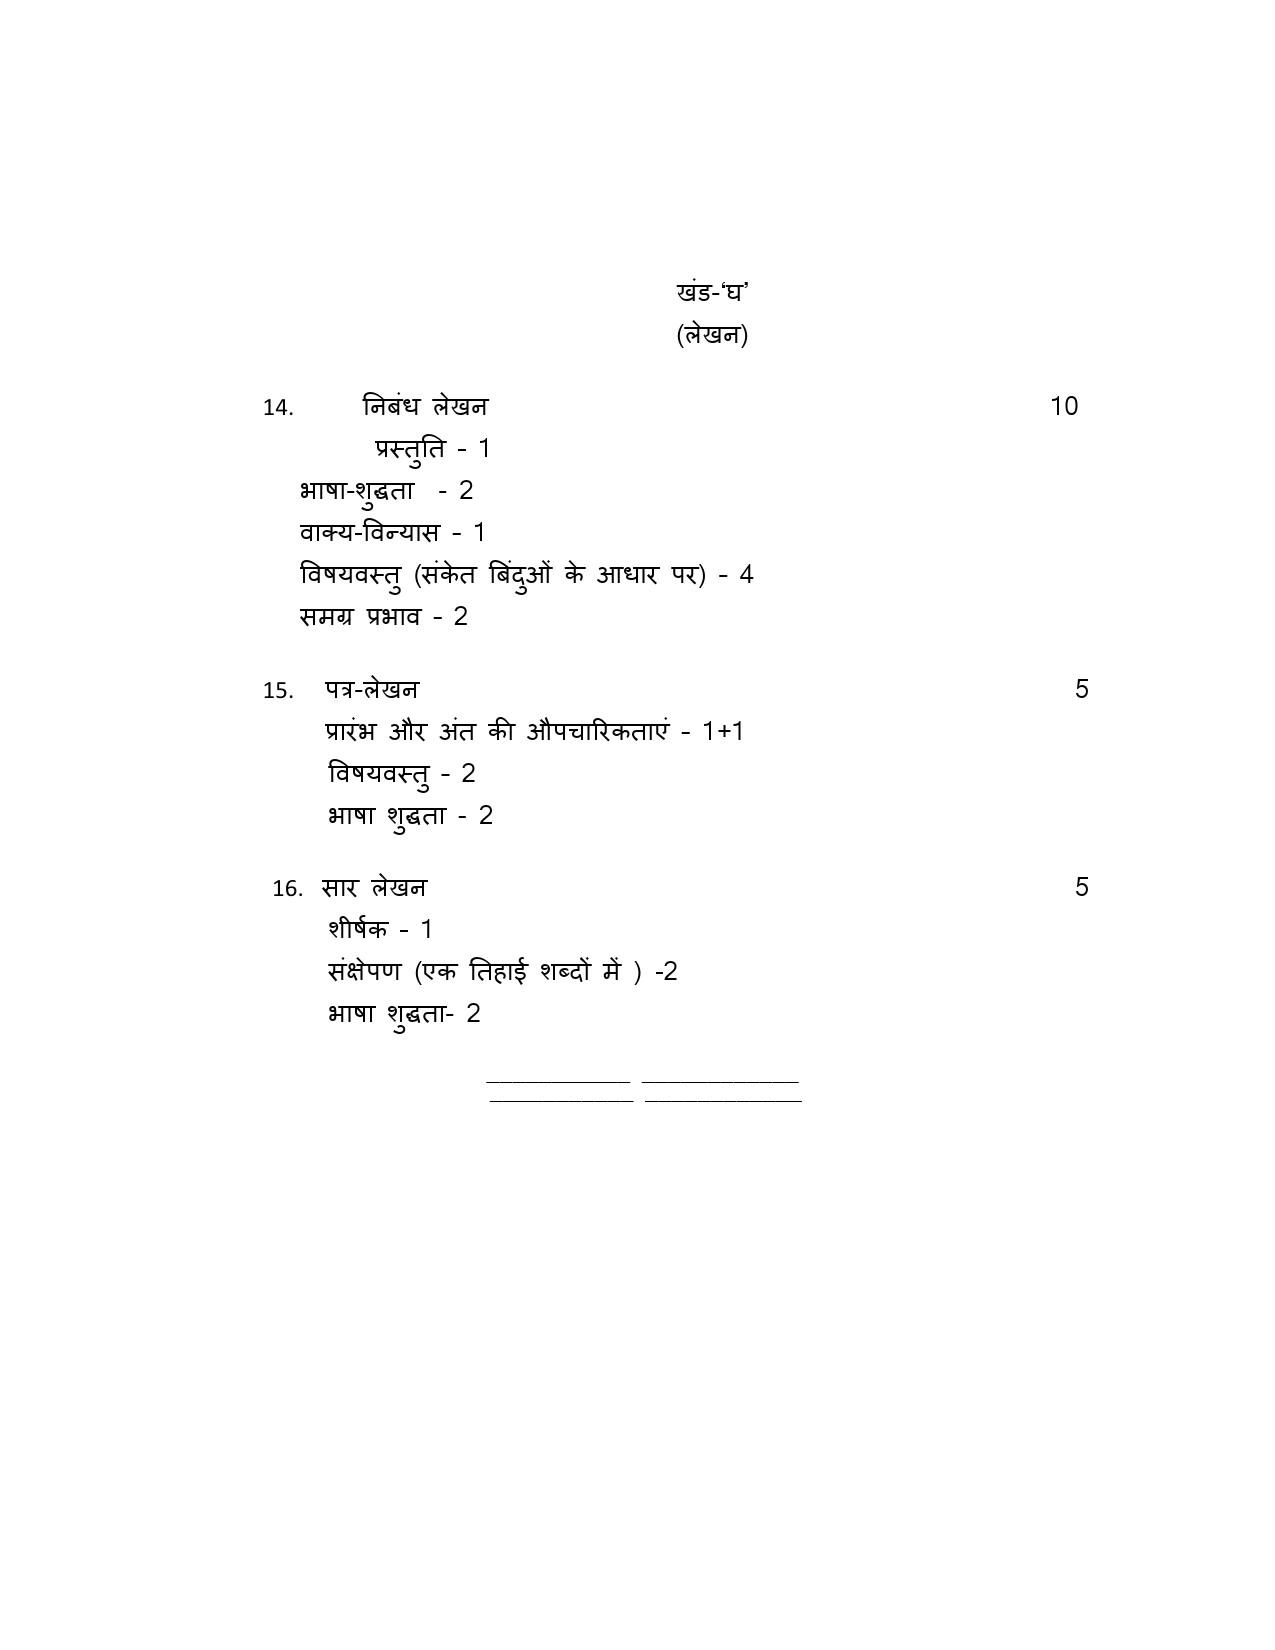 Hindi A CBSE Class X Sample Question Paper 2015 16 - Image 15